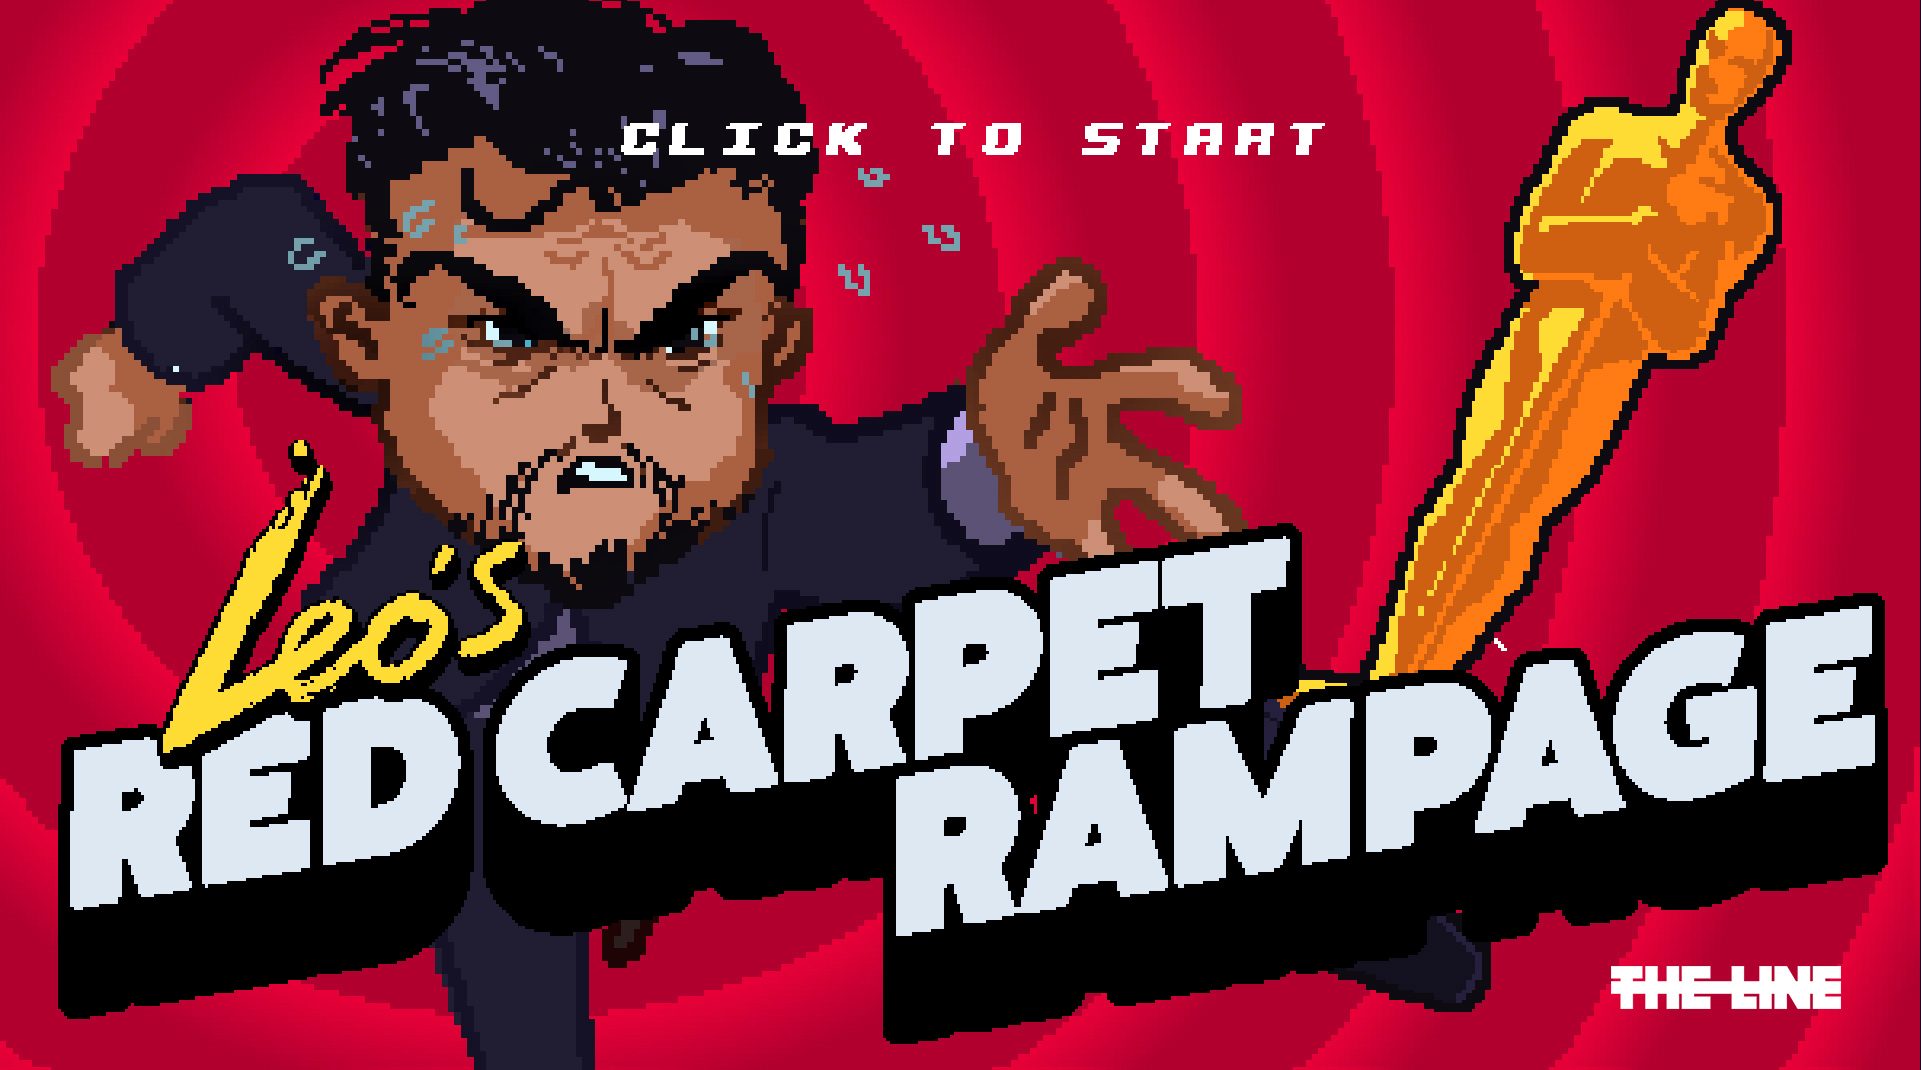 LOOK: Get Leonardo DiCaprio an Oscar in funny game ‘Leo’s Red Carpet Rampage’